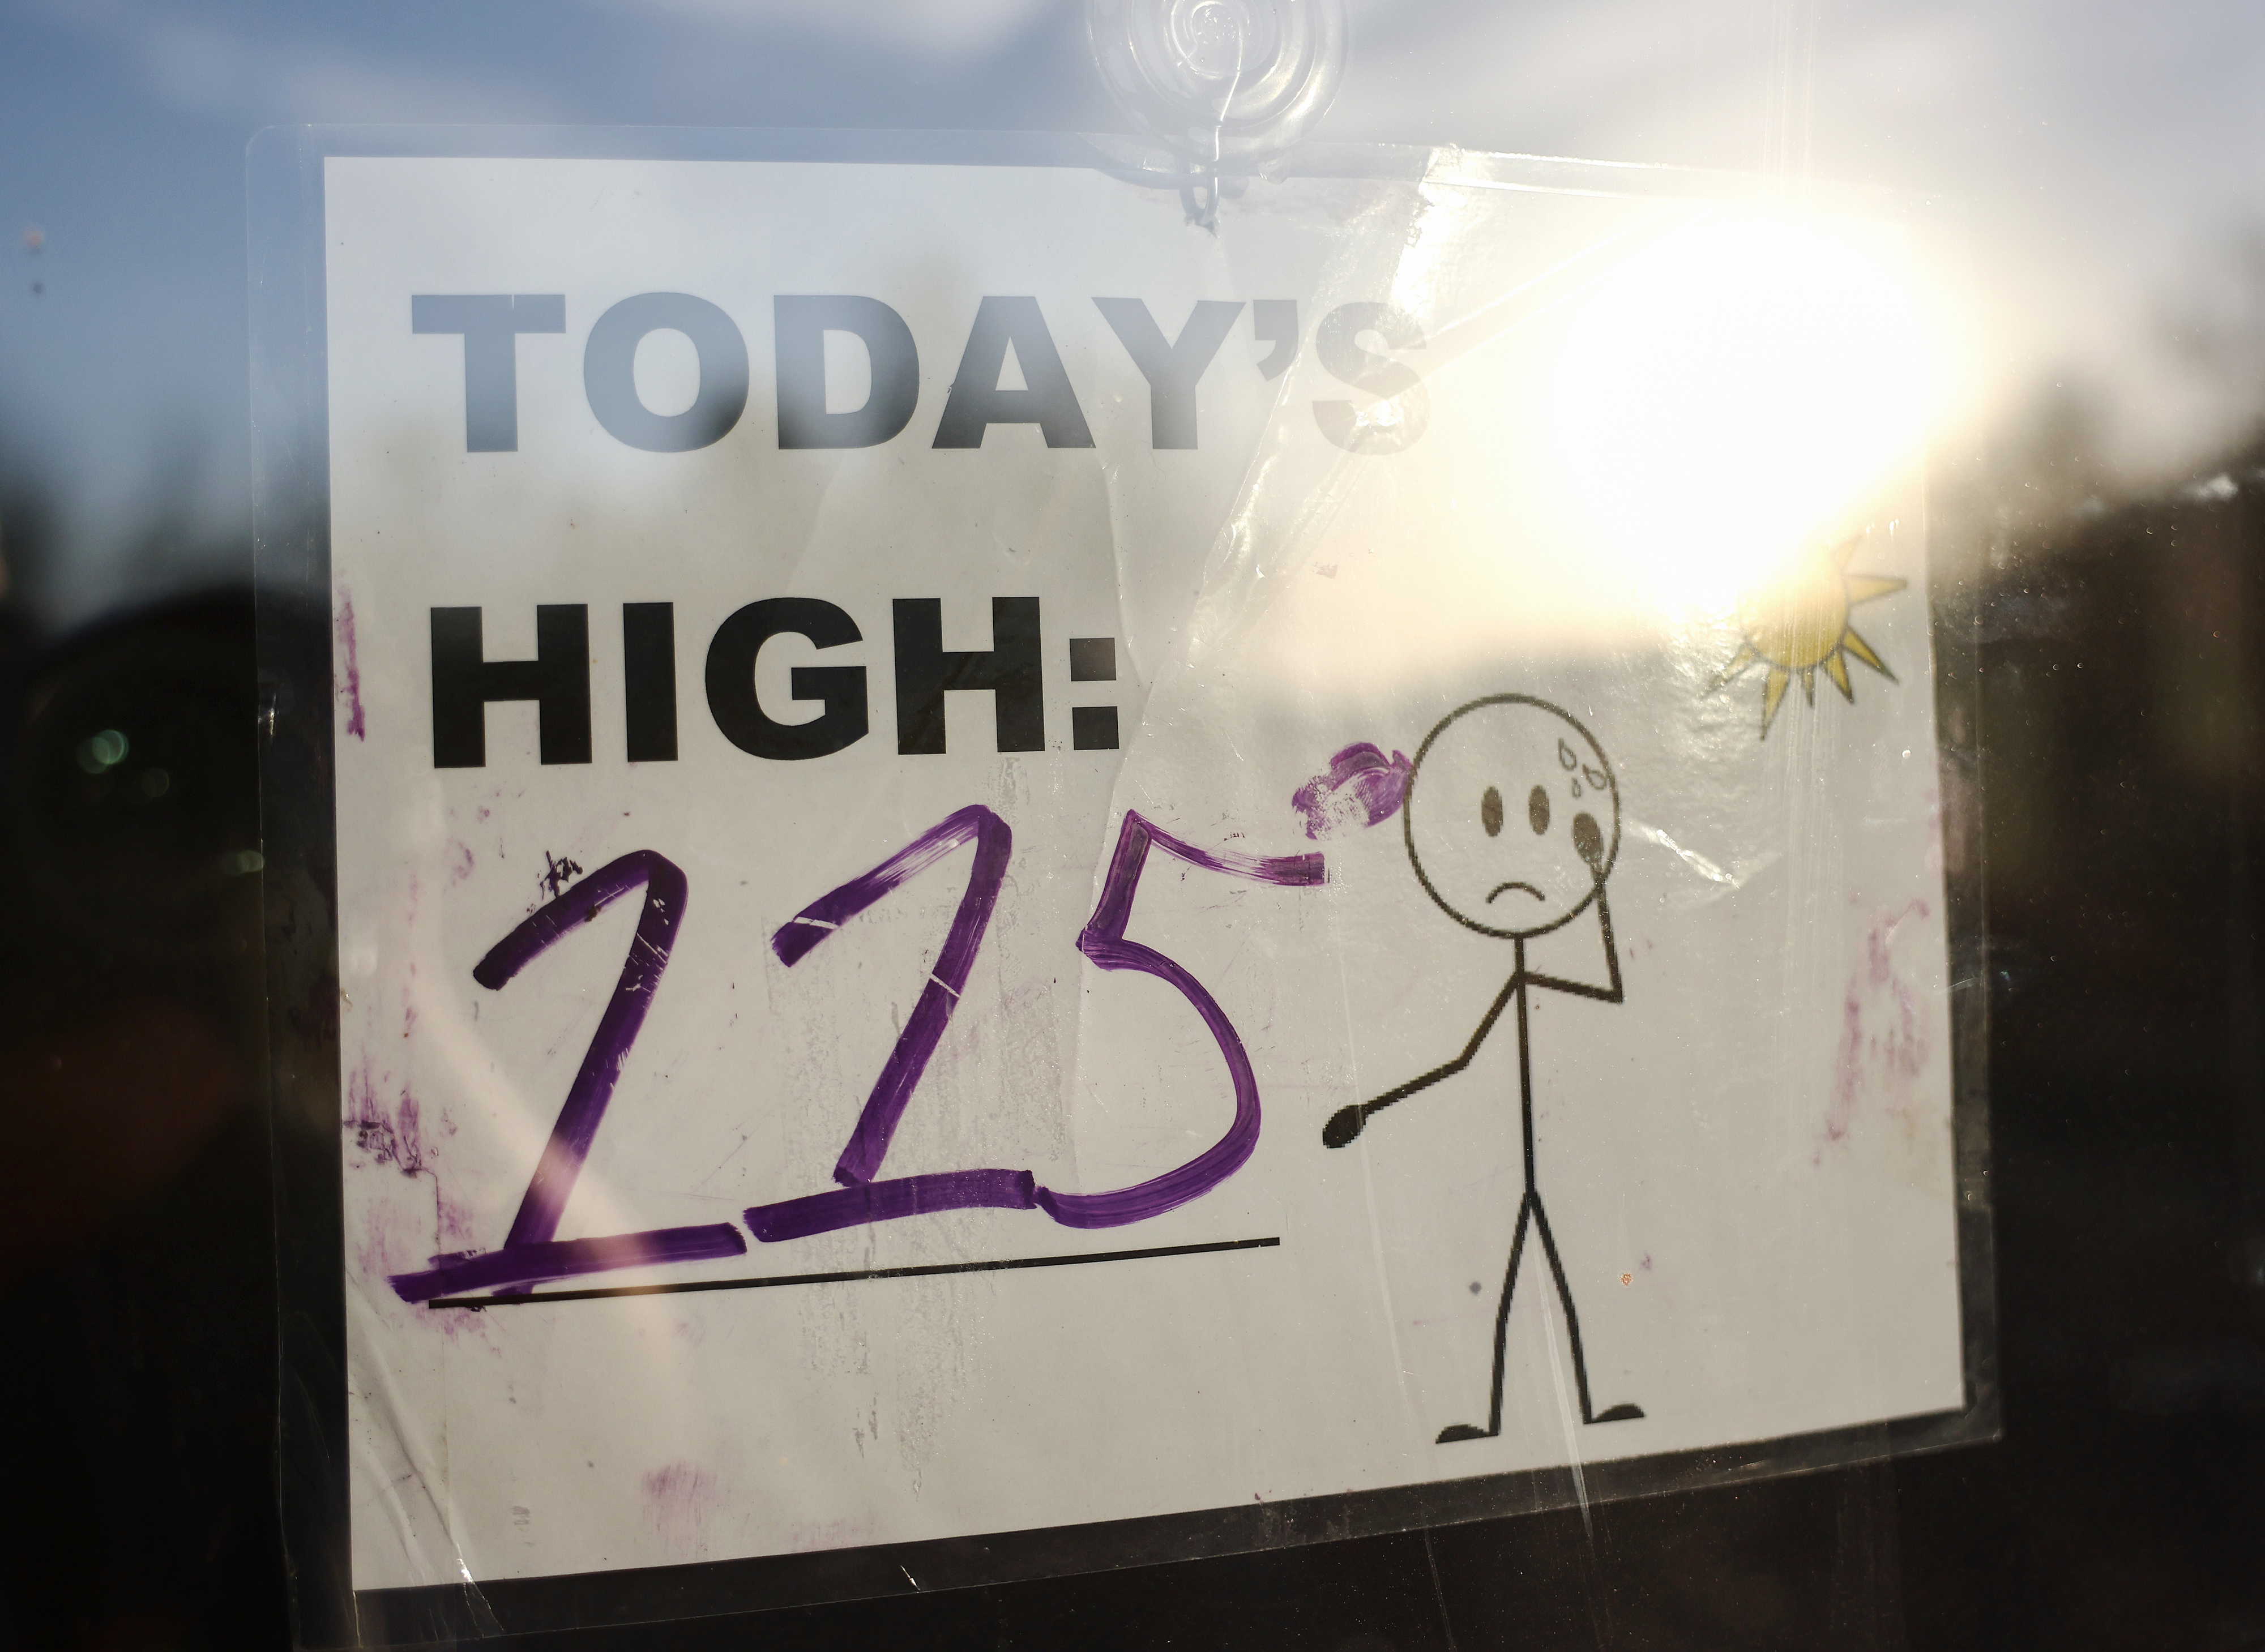 A sign in a window that says &quot;Today&#x27;s high: 115&quot;